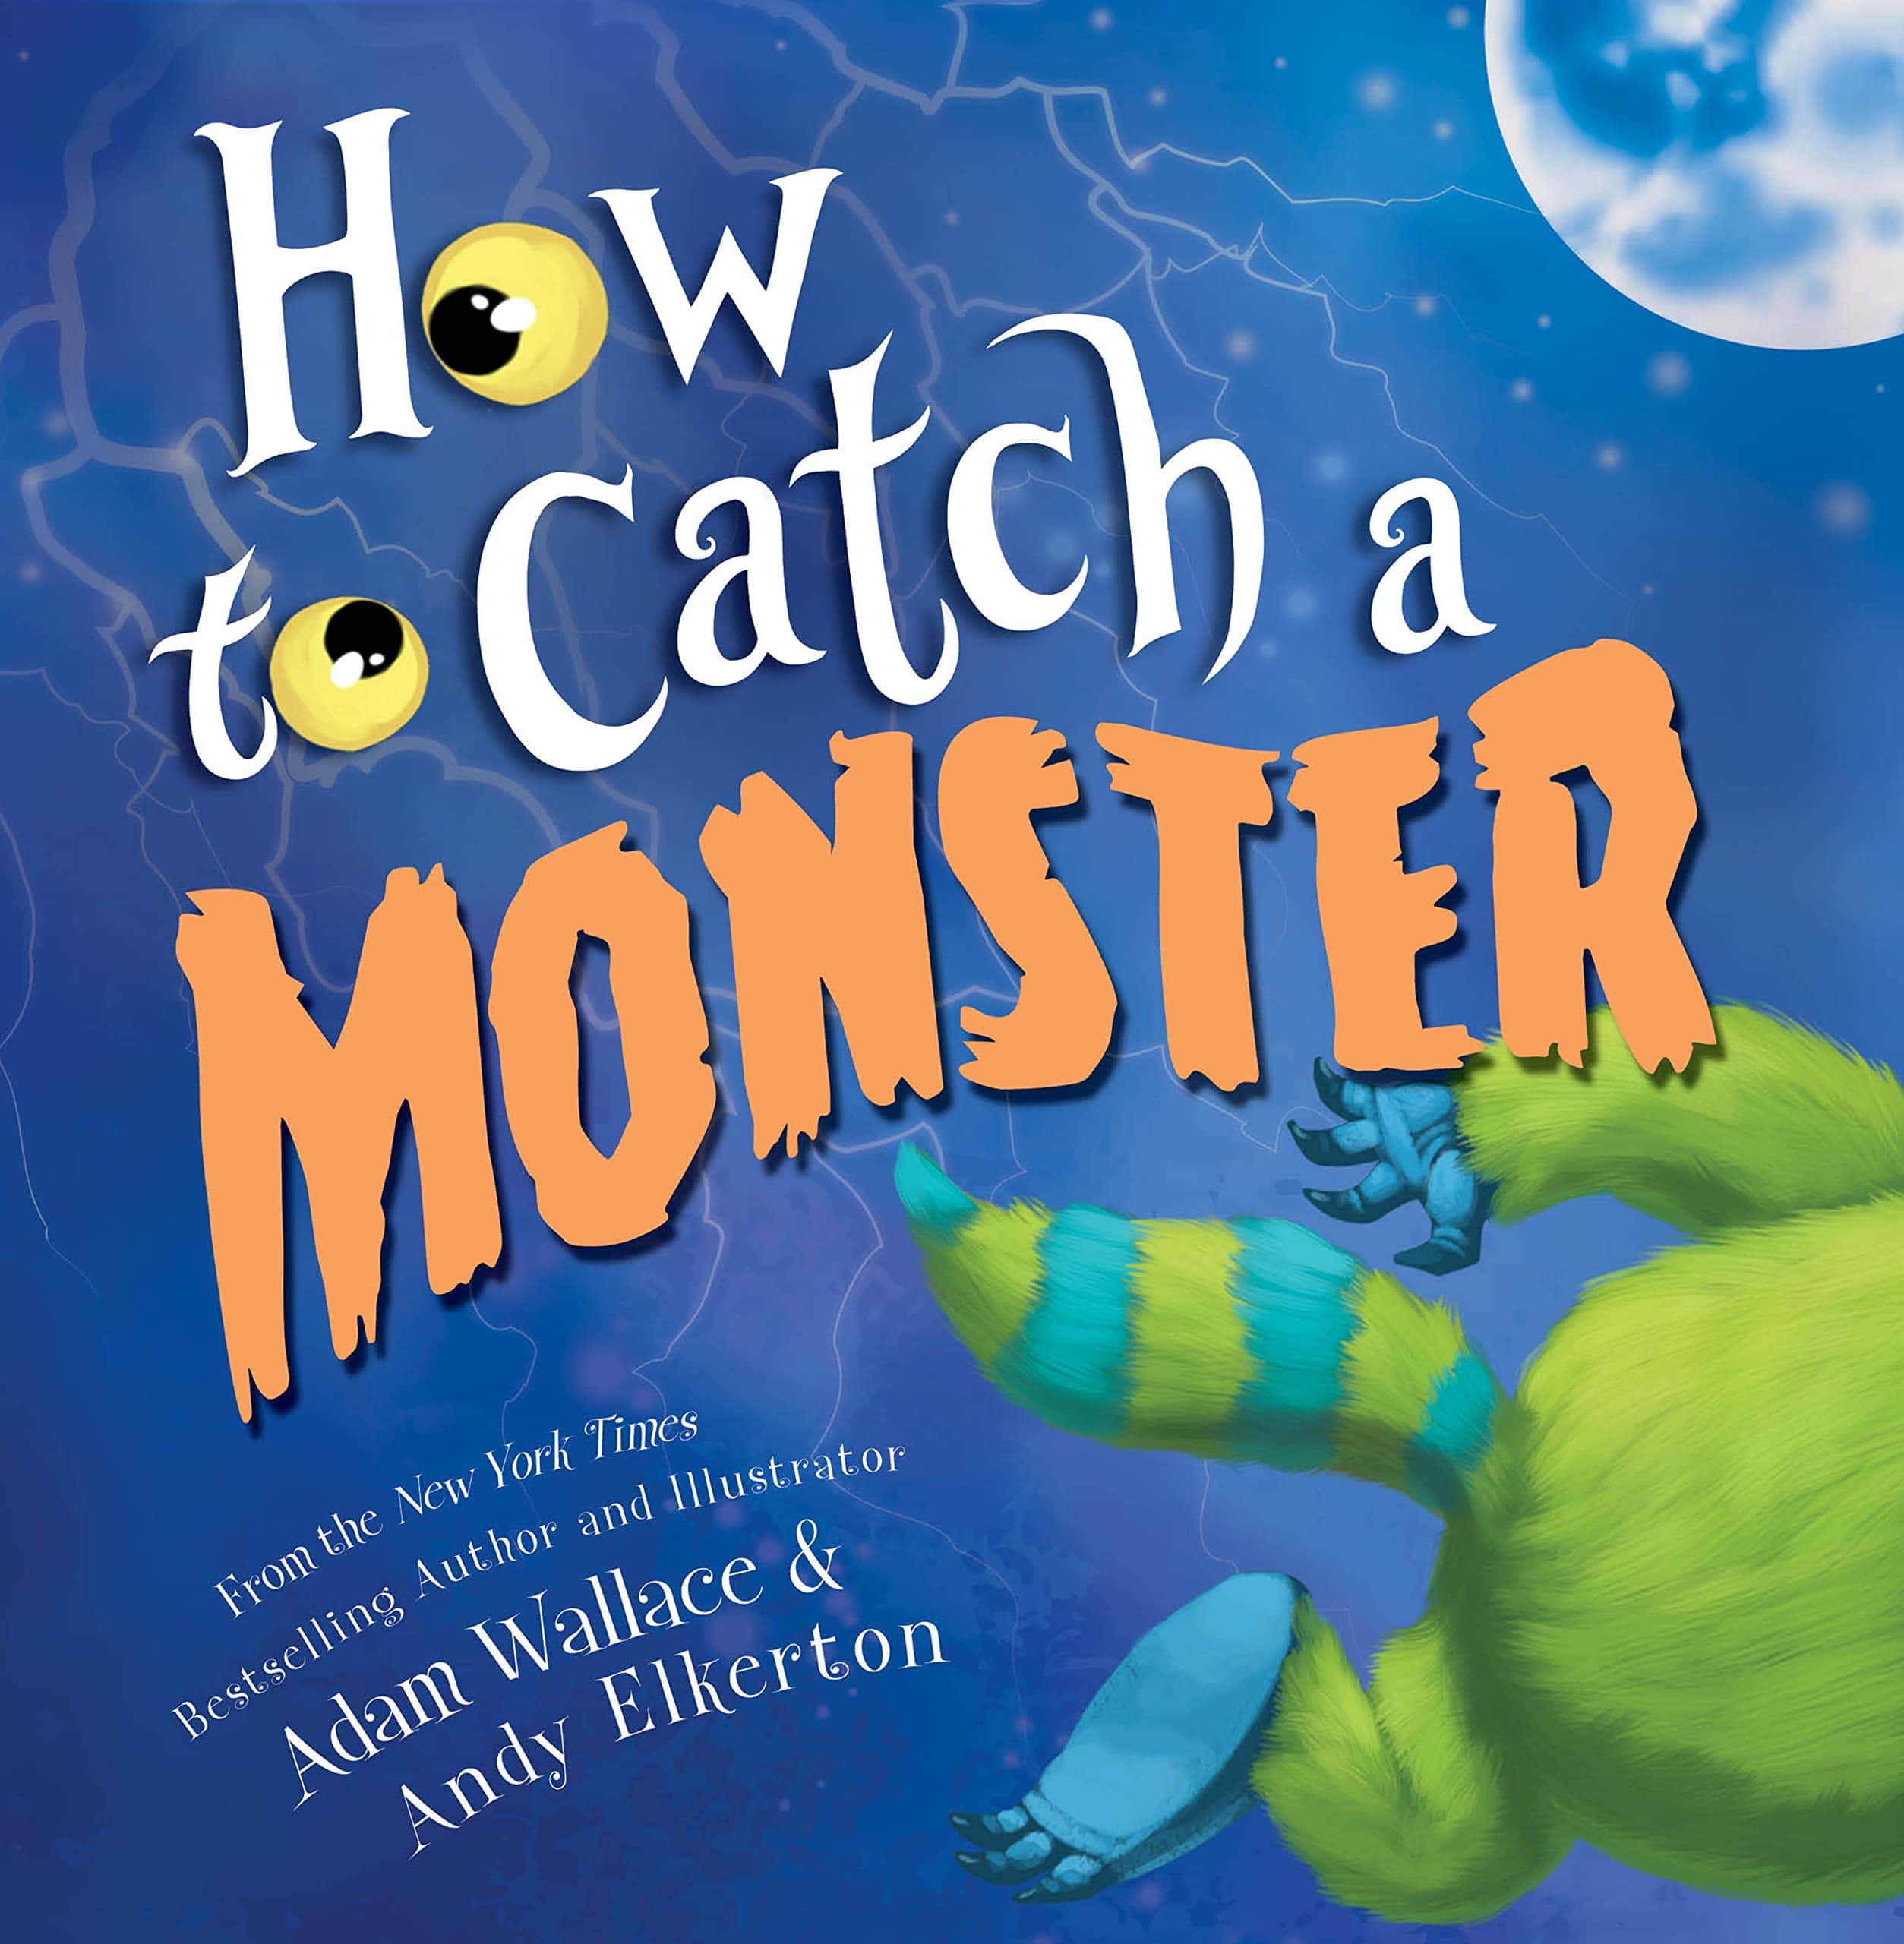 "How to Catch a Monster" by Adam Wallace